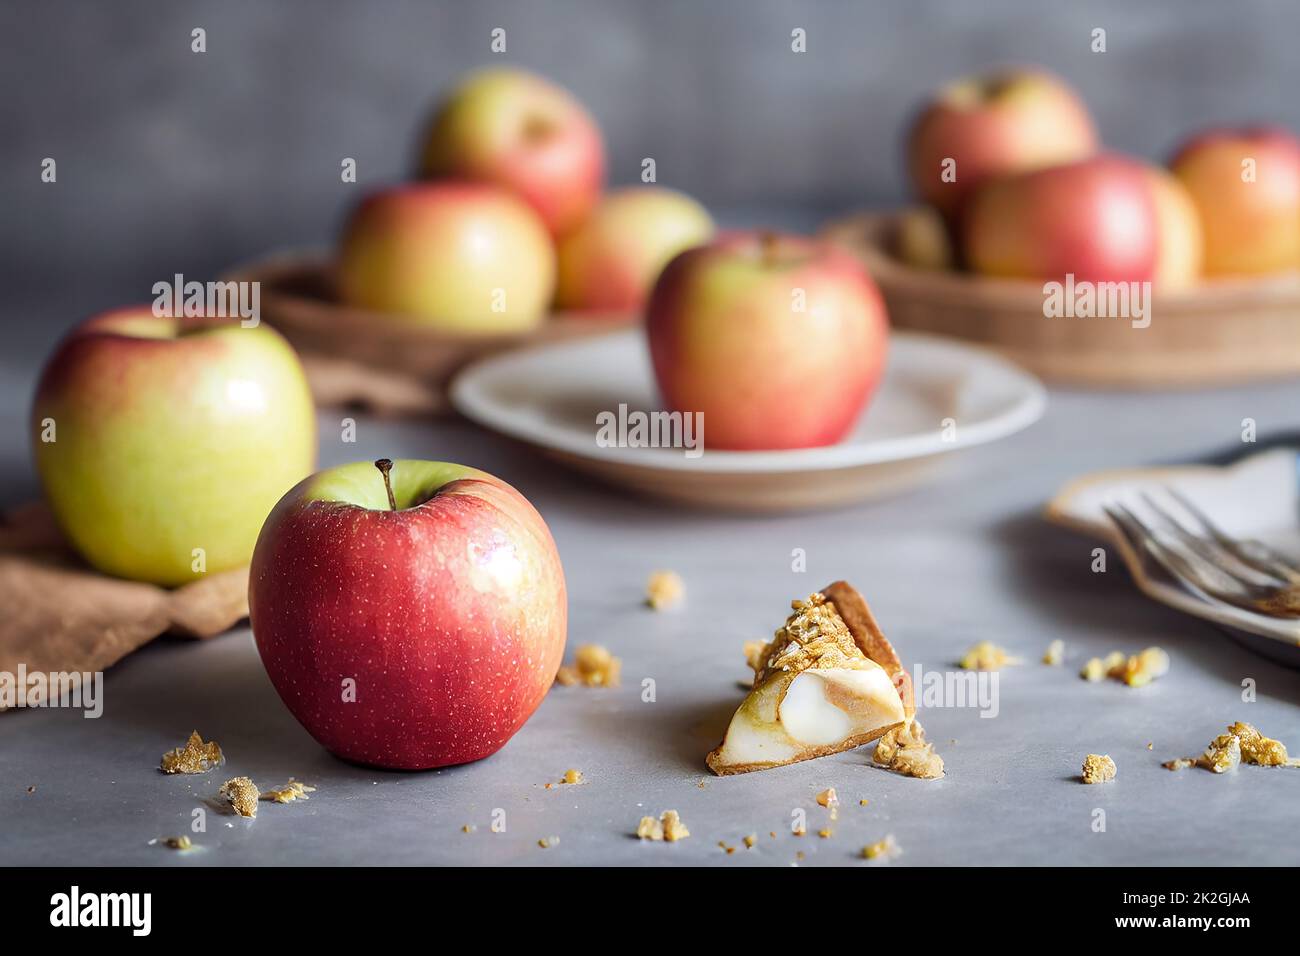 Fresh red apples on the table with apple pie crumbs in the foreground, gray background, food photography and illustration Stock Photo